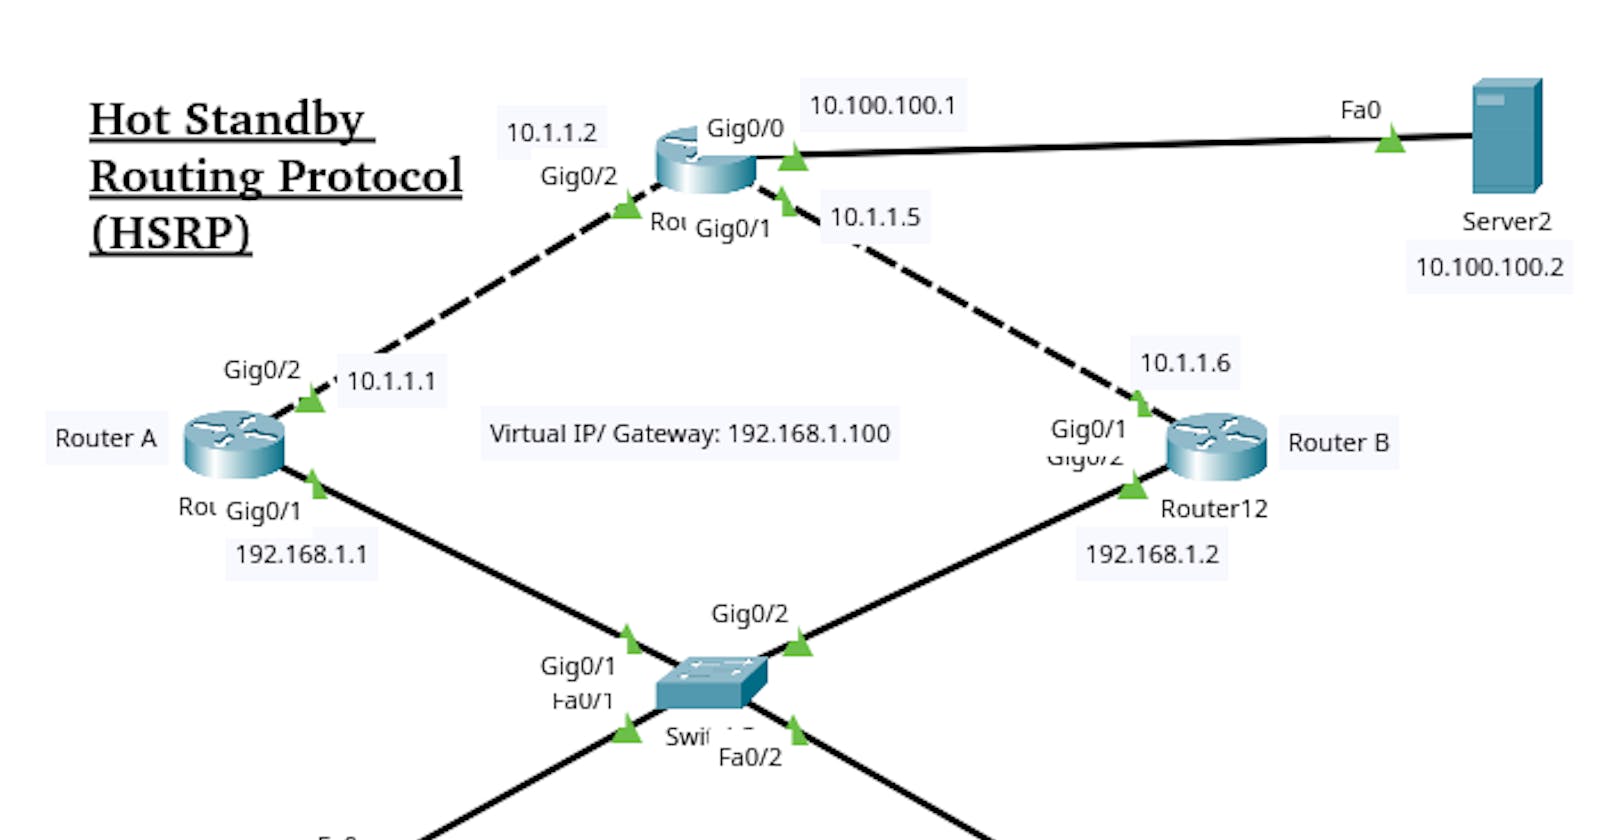 HSRP: Hot Standby Routing Protocol